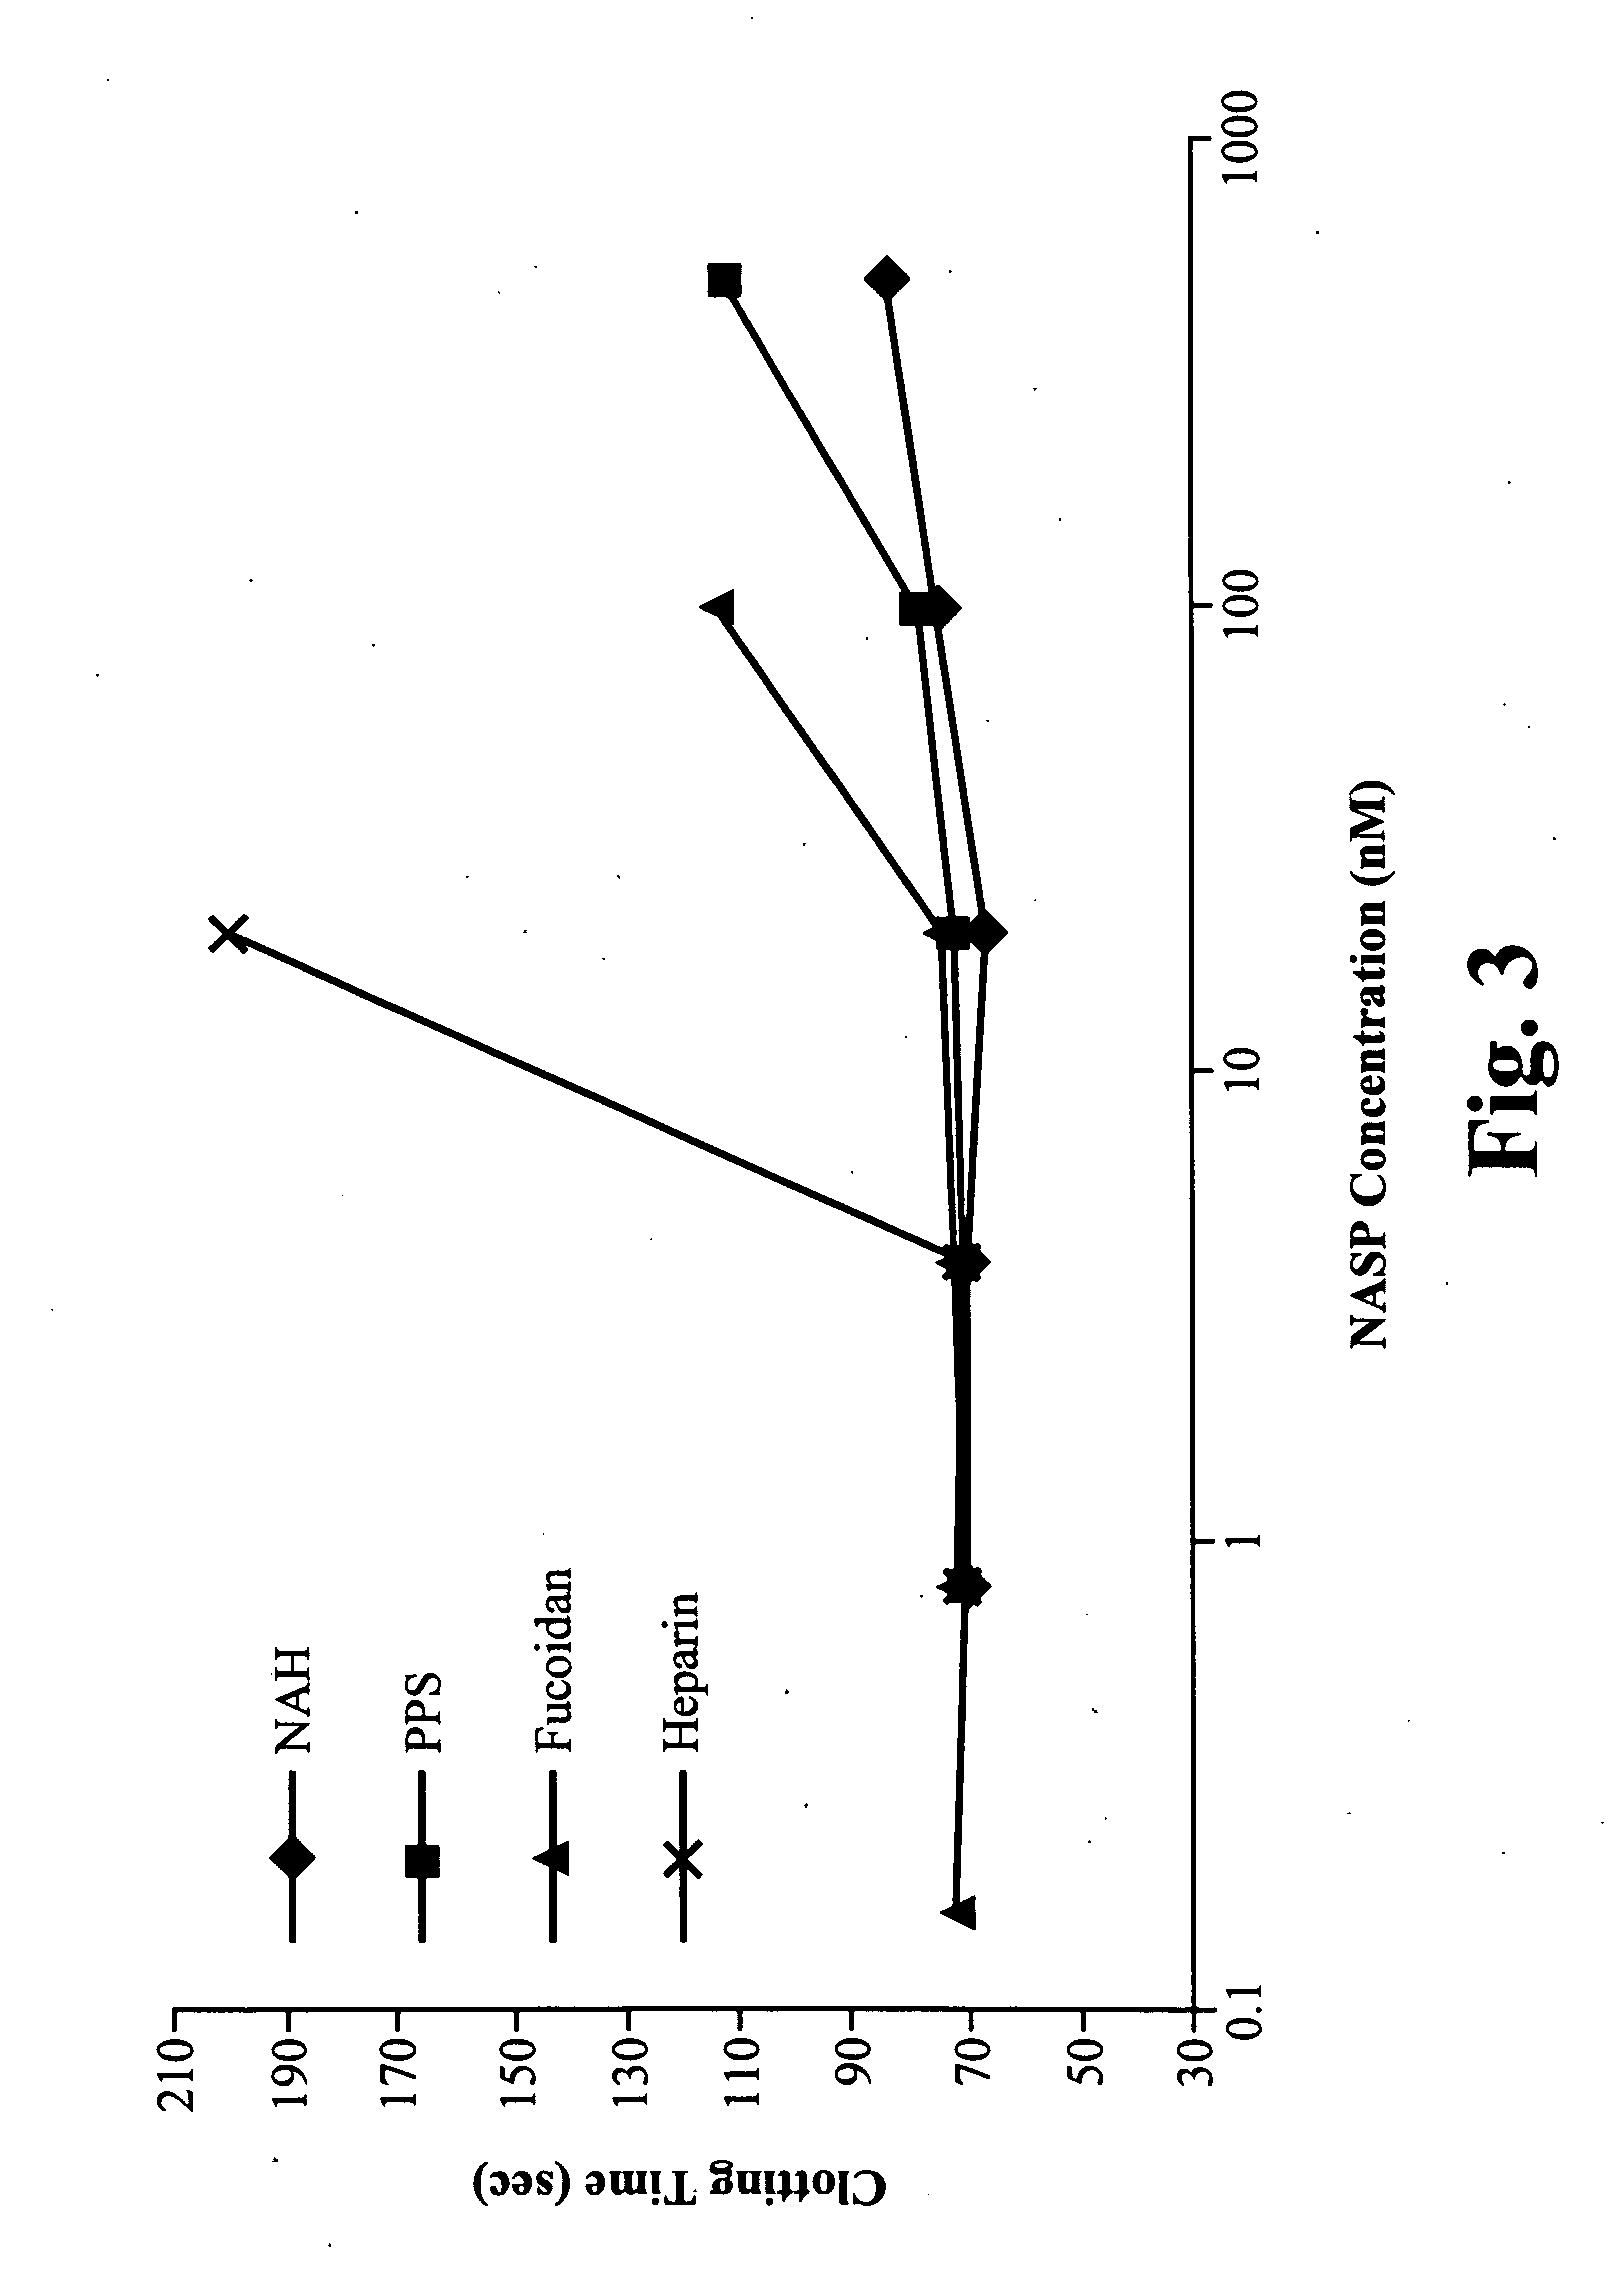 Methods for treating bleeding disorders using sulfated polysaccharides